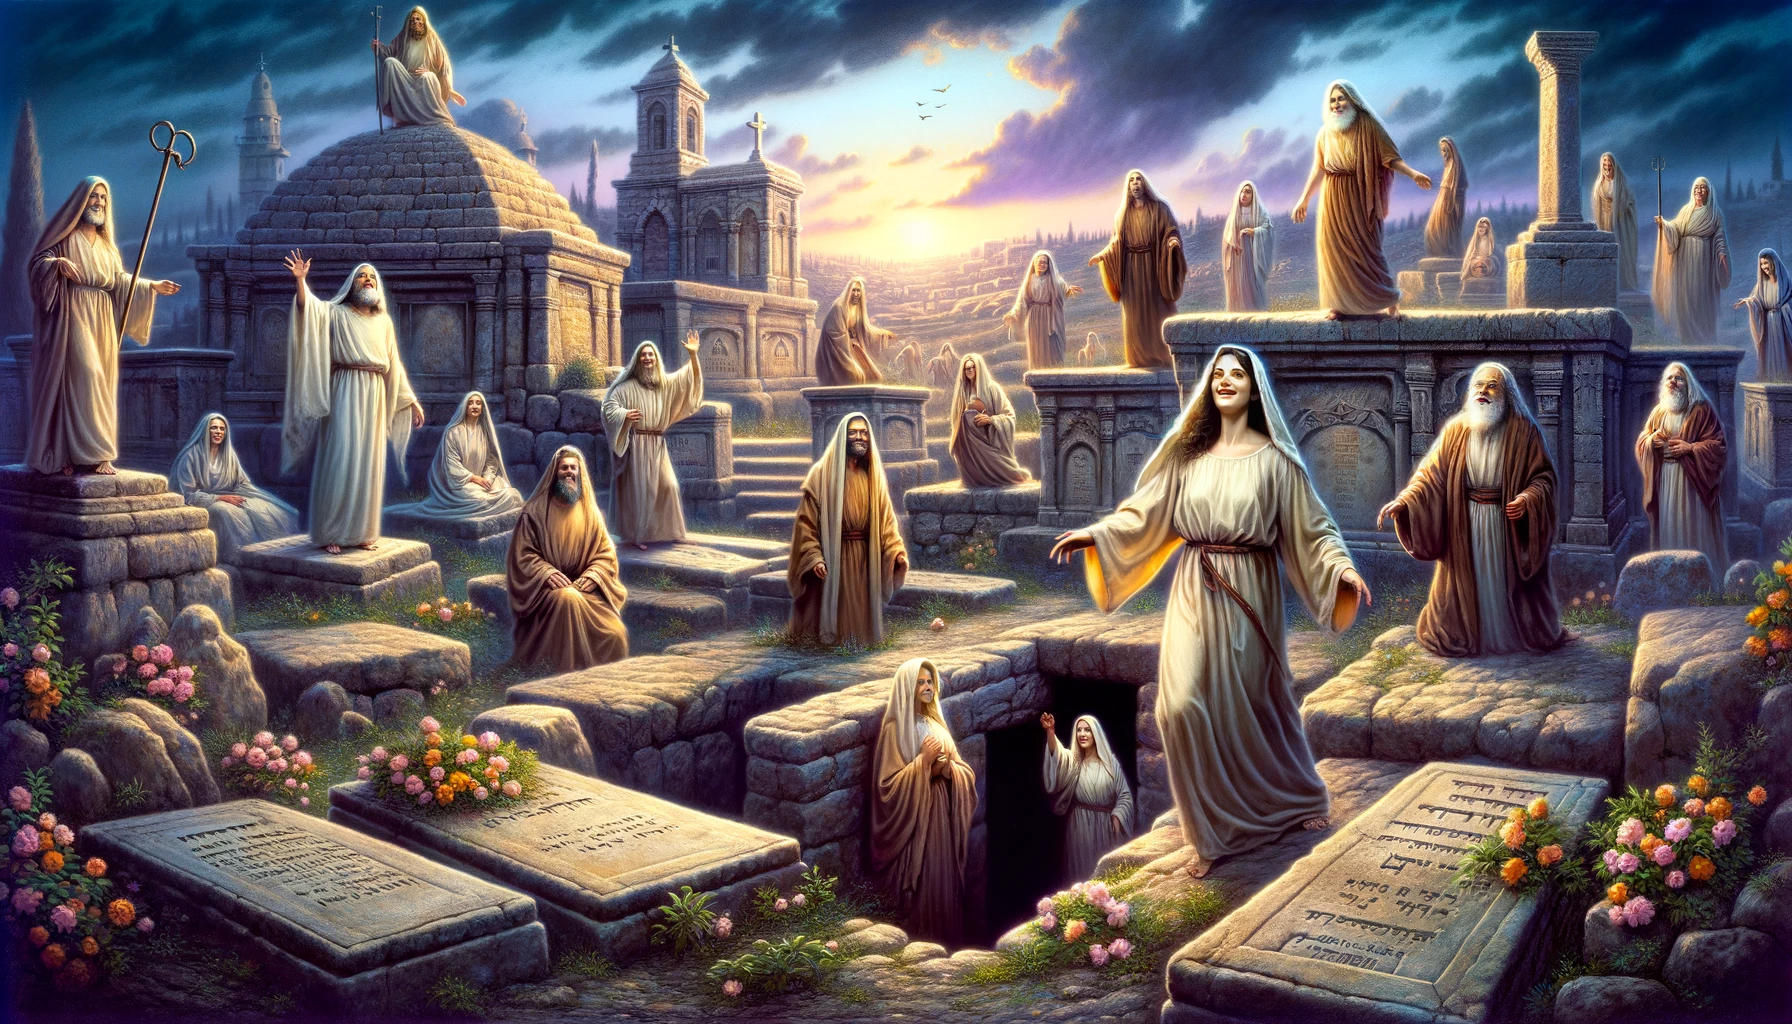 Ark.au Illustrated Bible - Matthew 27:53 - And came out of the graves after his resurrection, and went into the holy city, and appeared unto many.